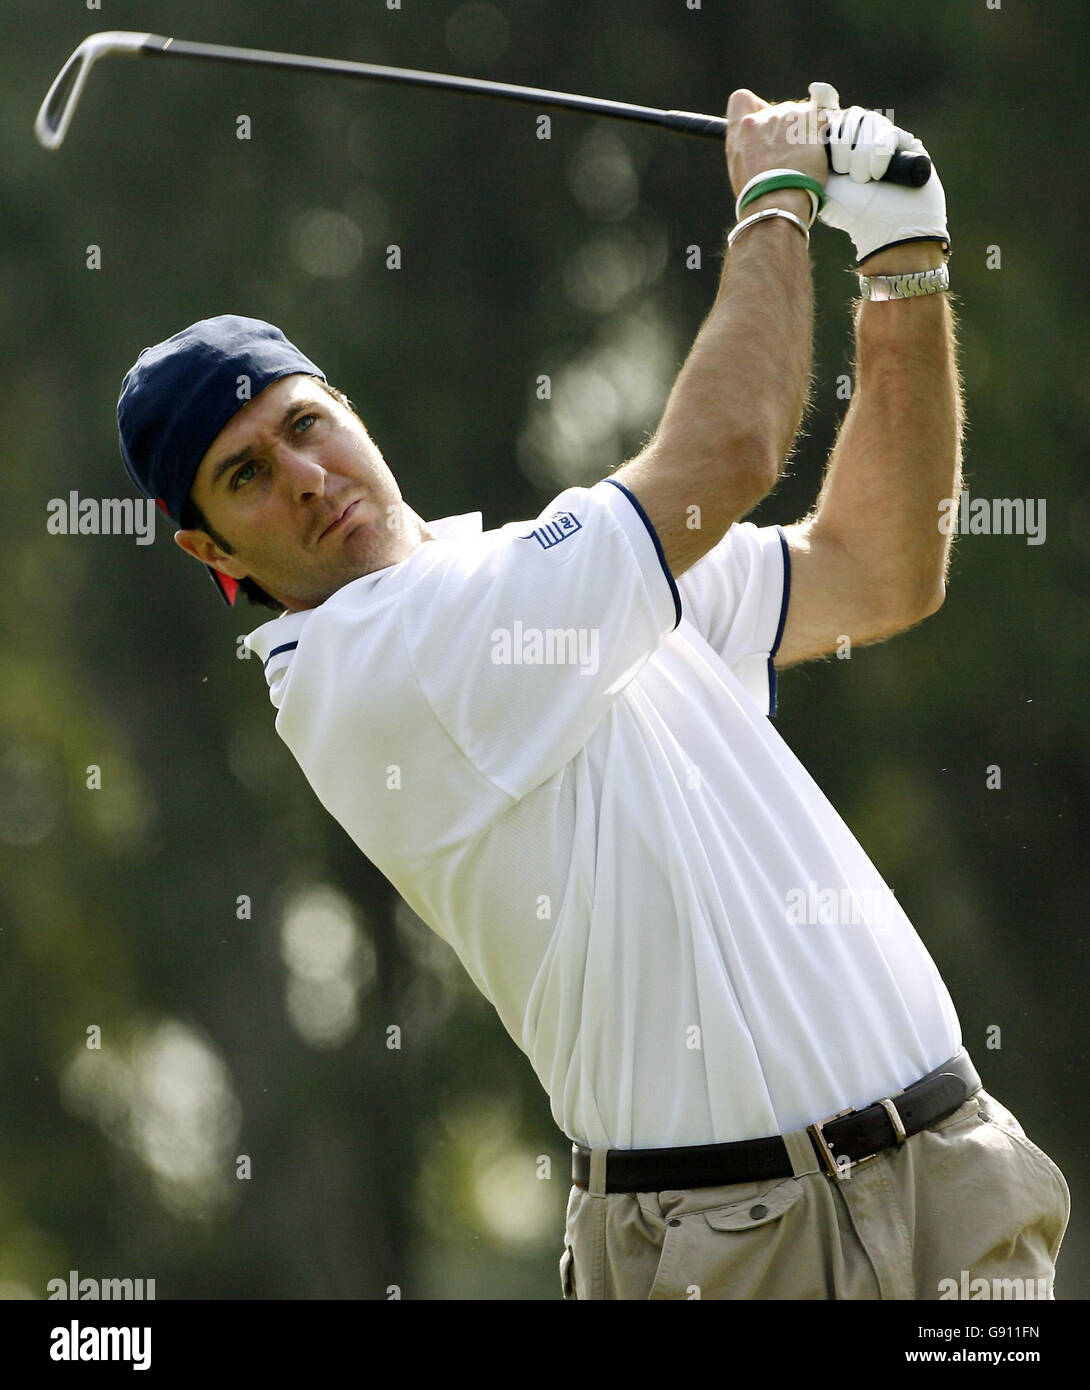 England captain Michael Vaughan tees off during the ECB Vodafone golf day at Royal Palm Golf and Country Club, Lahore, Pakistan, Friday November 4, 2005. England play a Pakistan A team from 6-8th November. Watch for PA story CRICKET England. PRESS ASSOCIATION Photo. Photo credit should read: Gareth Copley/PA. Stock Photo